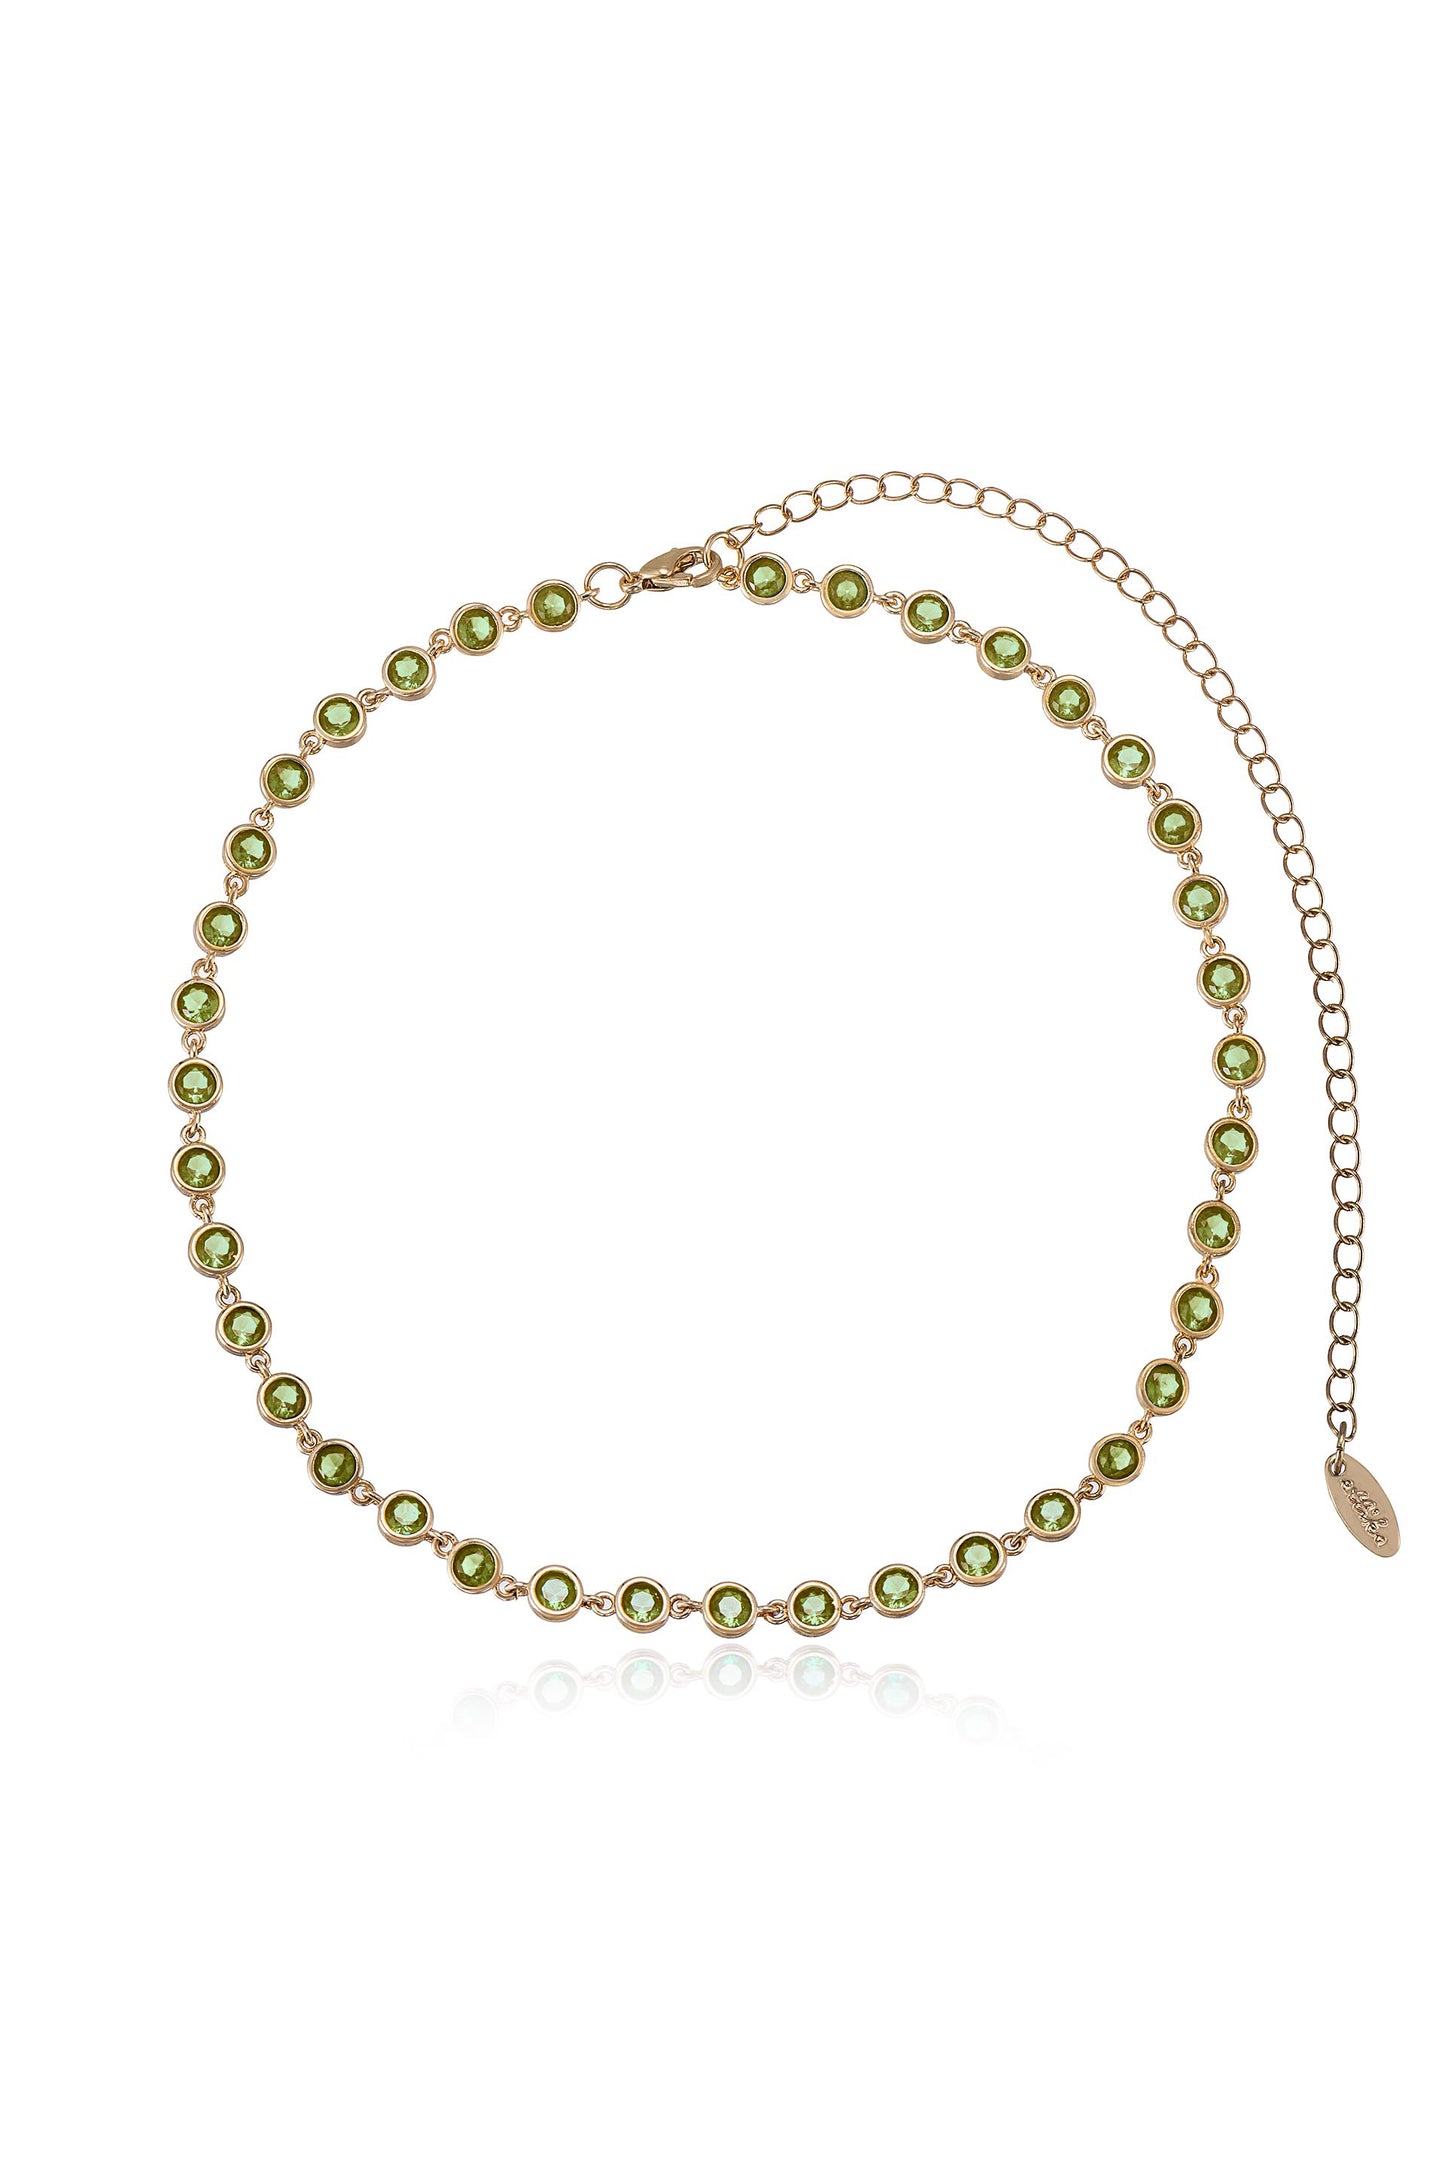 Crystal Disc and Link Necklace in peridot